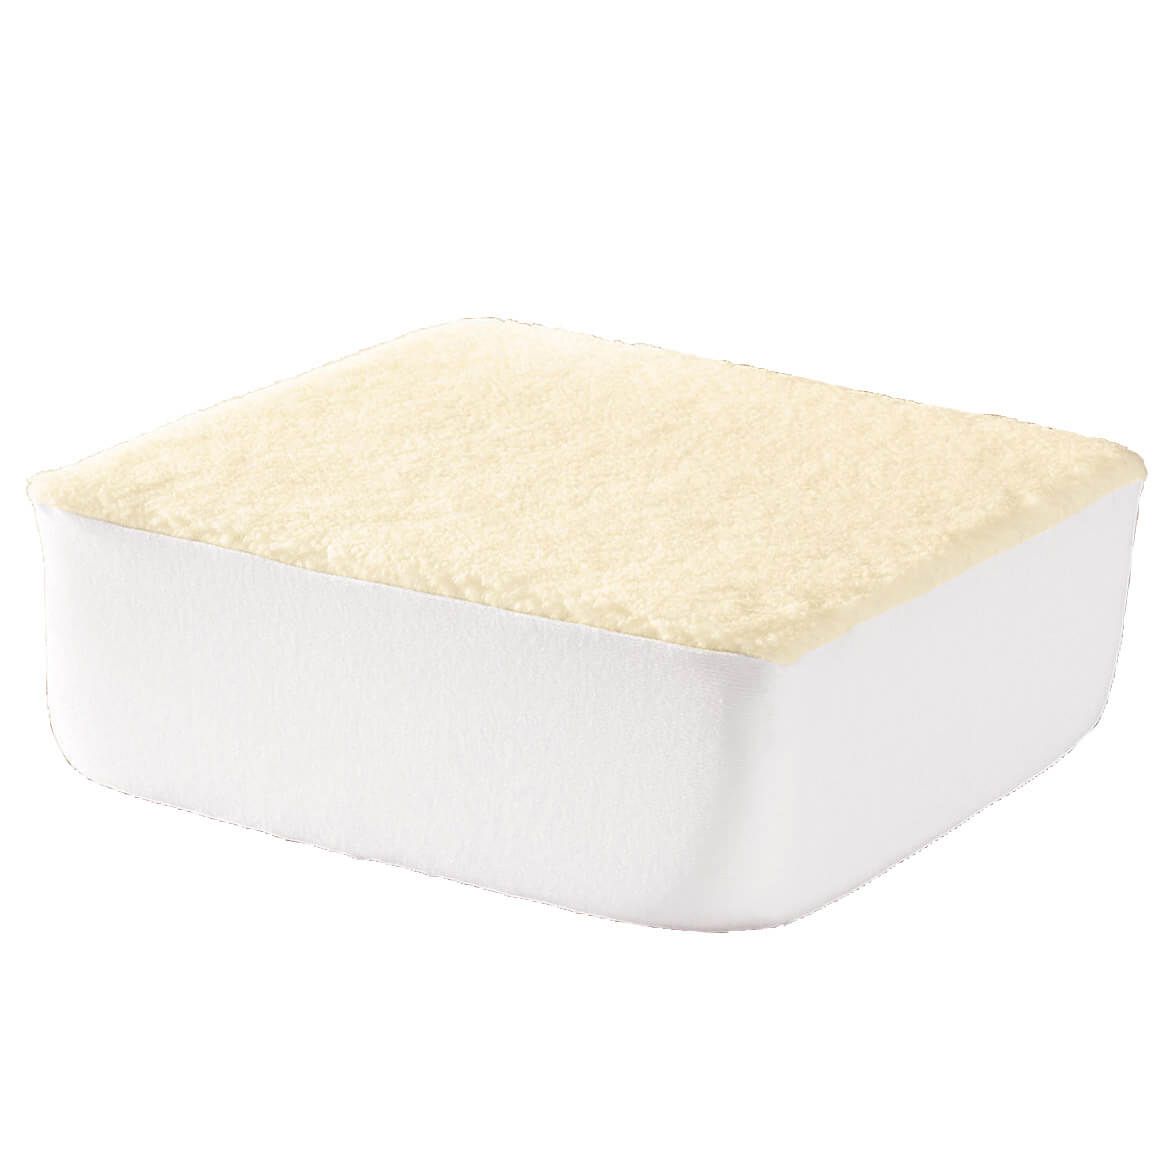 Extra Thick Foam Cushion by LivingSURE™ + '-' + 302544